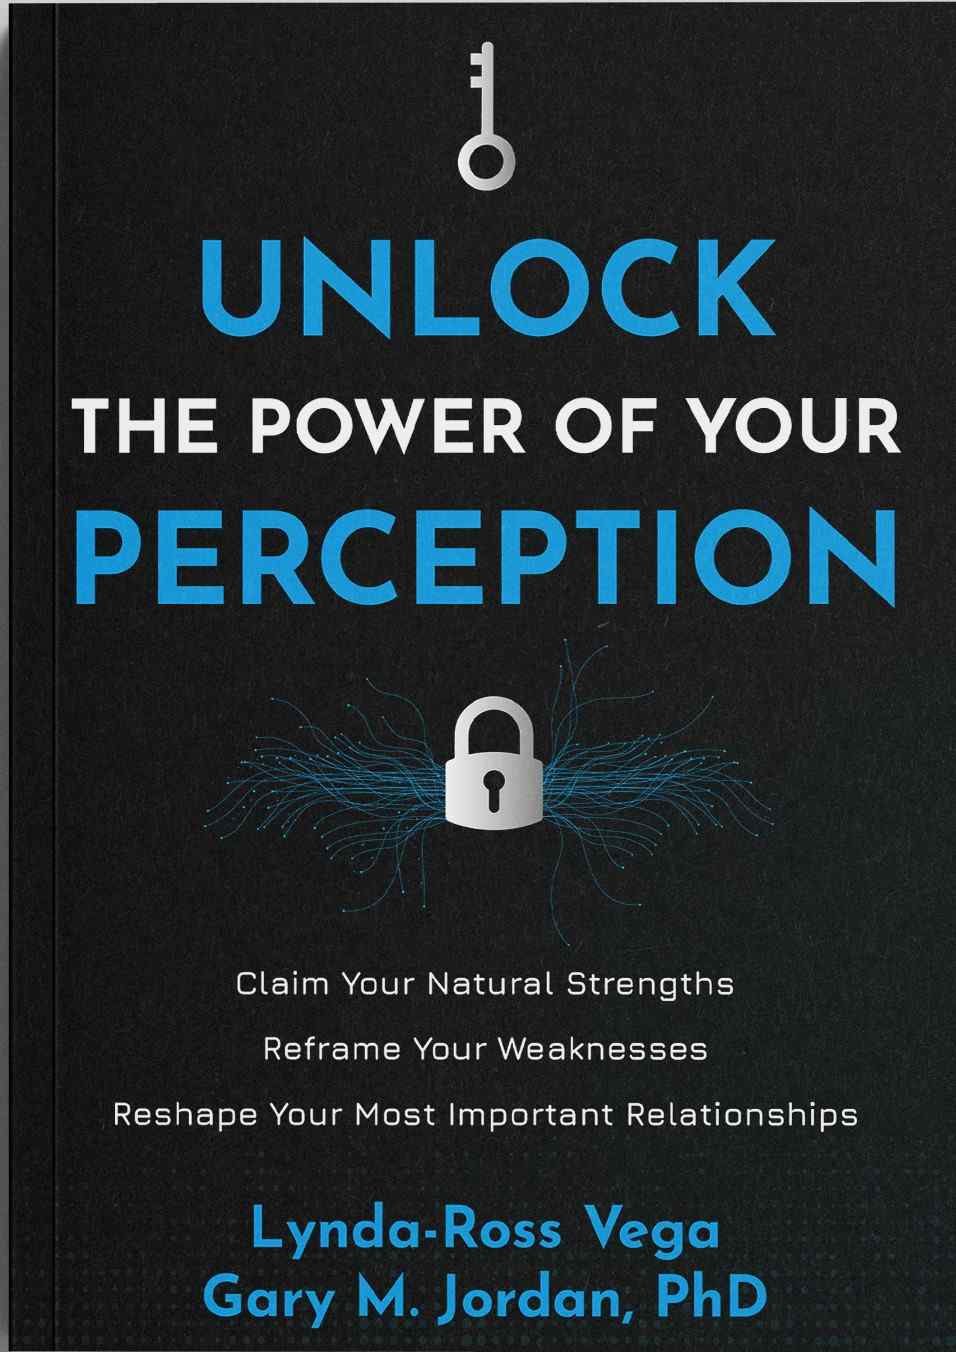 Unlock the Power of Your Perception